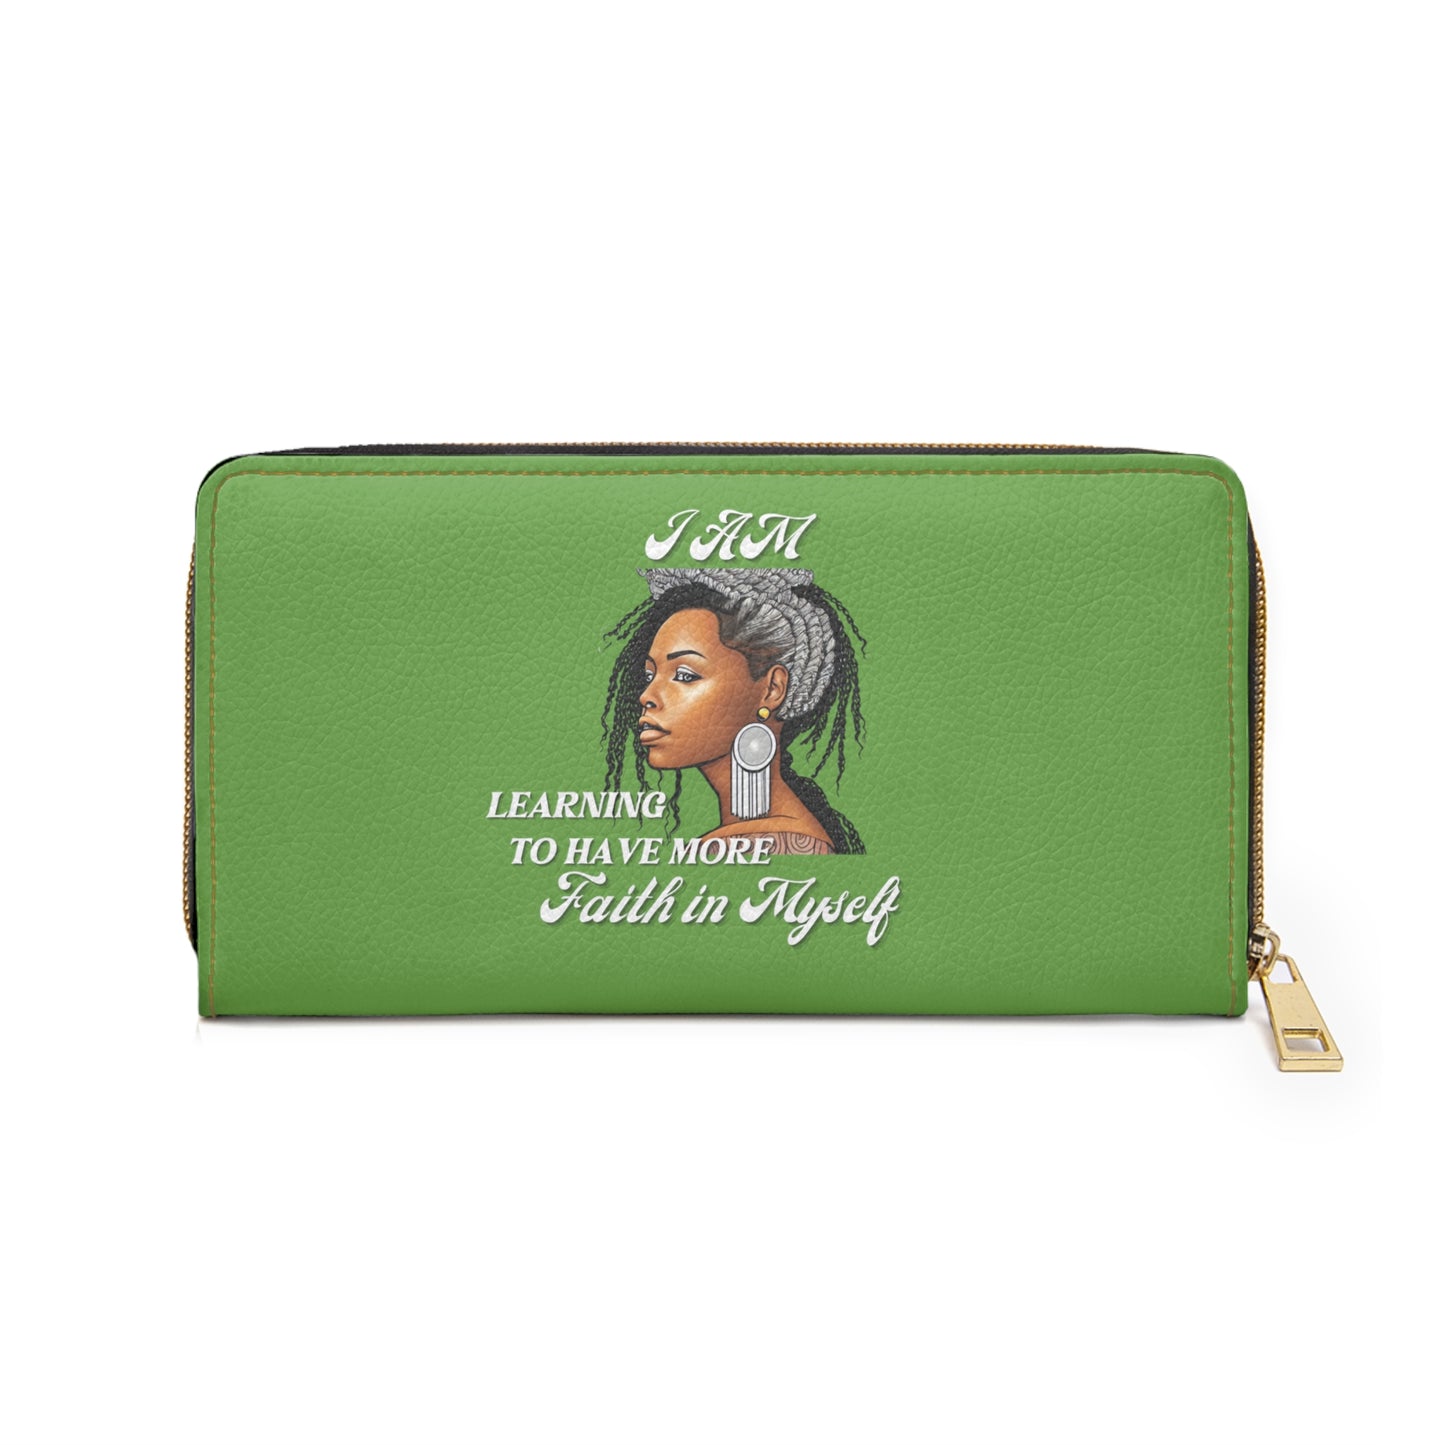 " Faith In Myself" -Positive Afrocentric Affirmation Vegan Leather Wallet Bag- Empower Your Style and Self-Love; Green Wallet